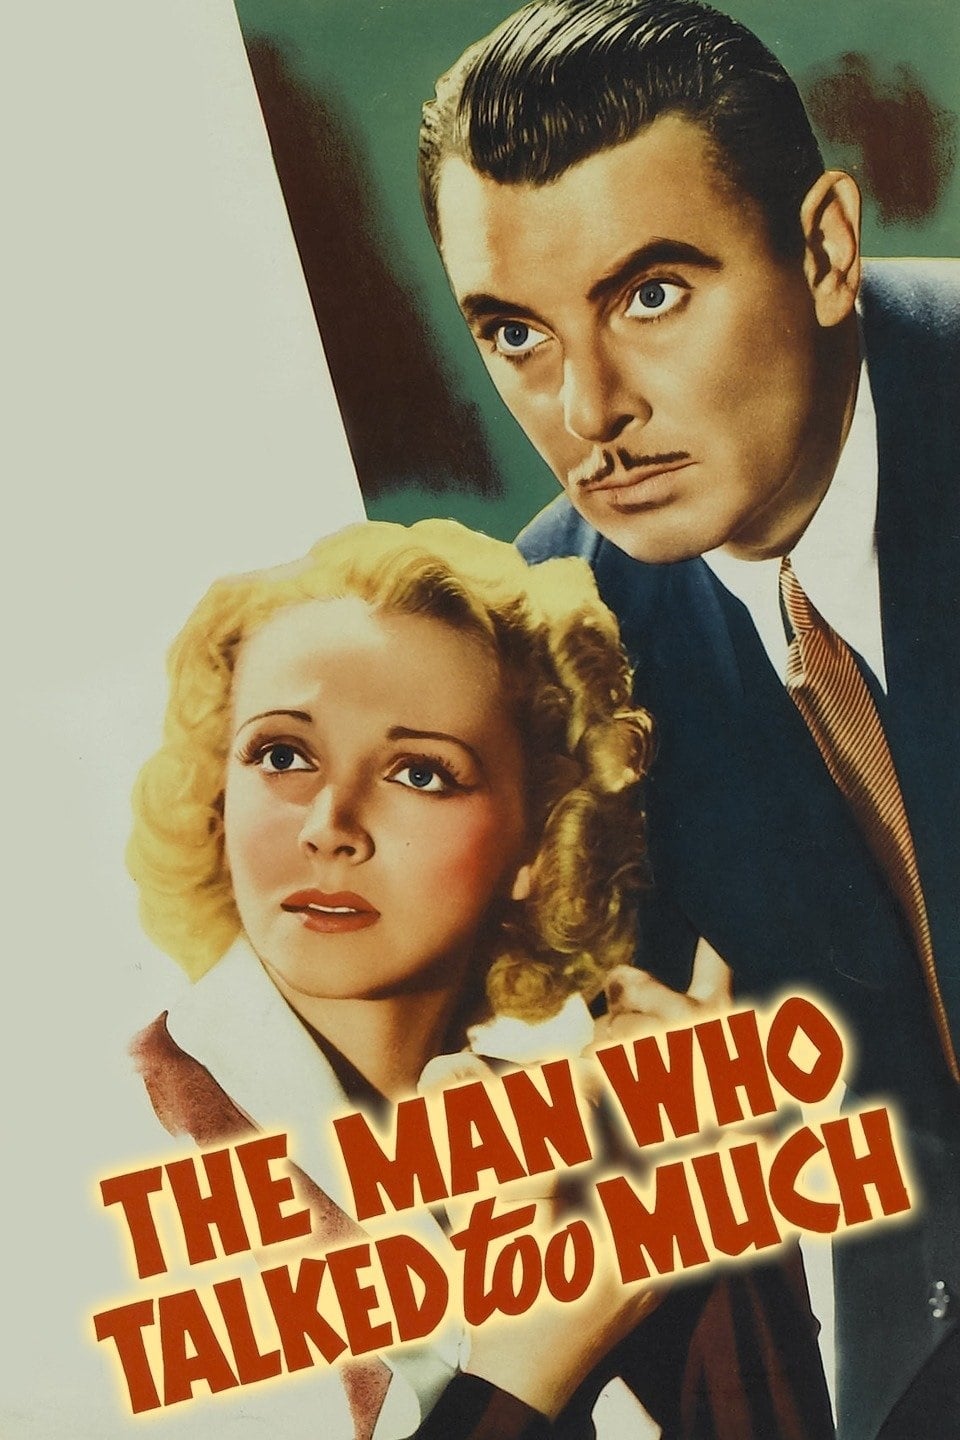 The Man Who Talked Too Much (1940)